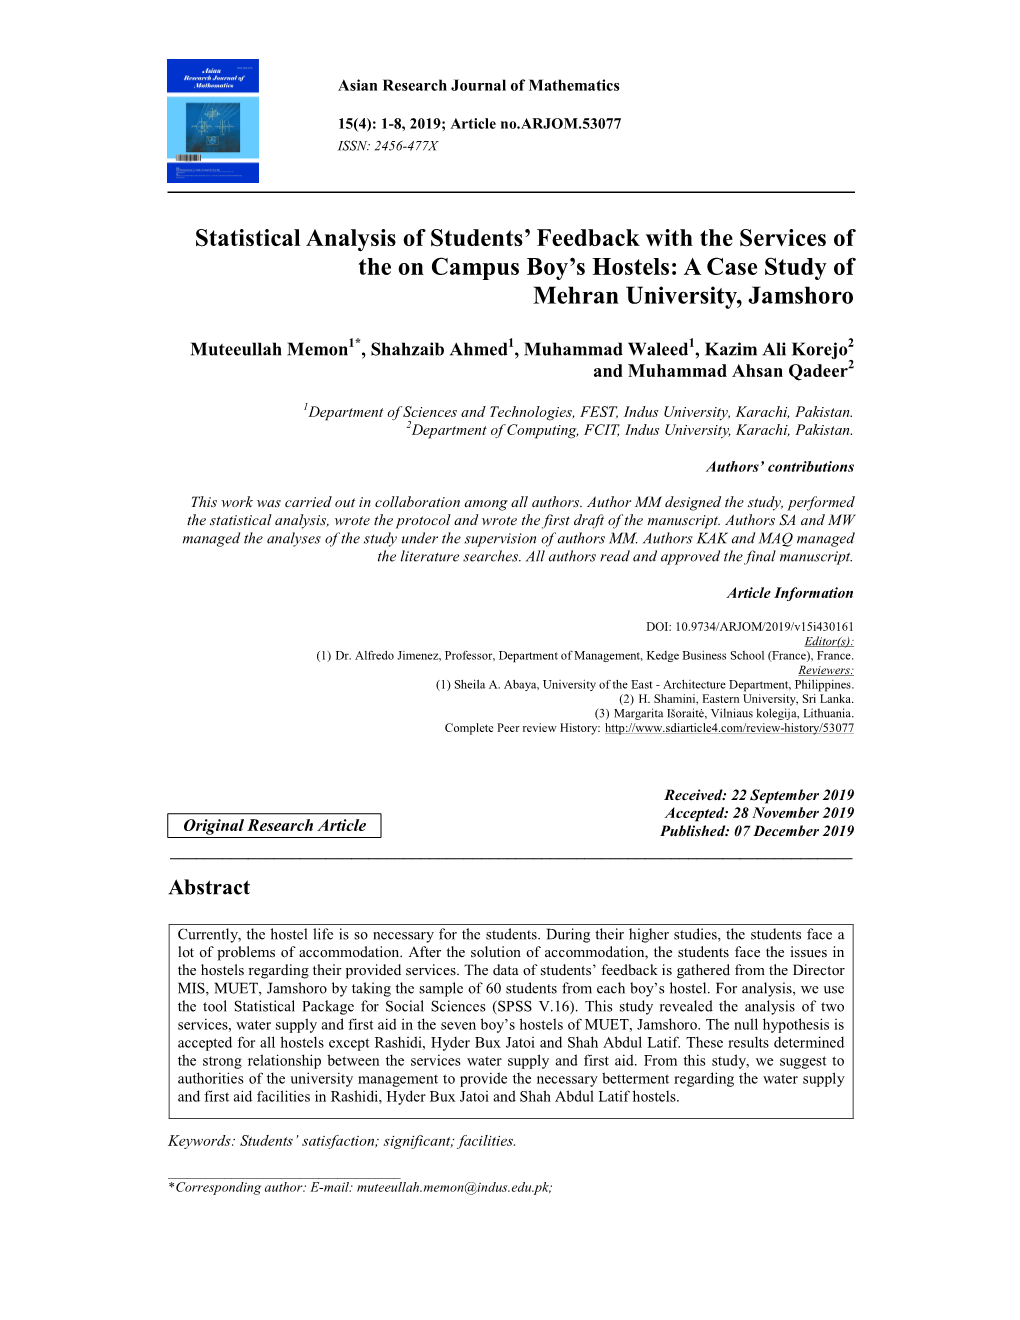 Statistical Analysis of Students' Feedback with the Services of The